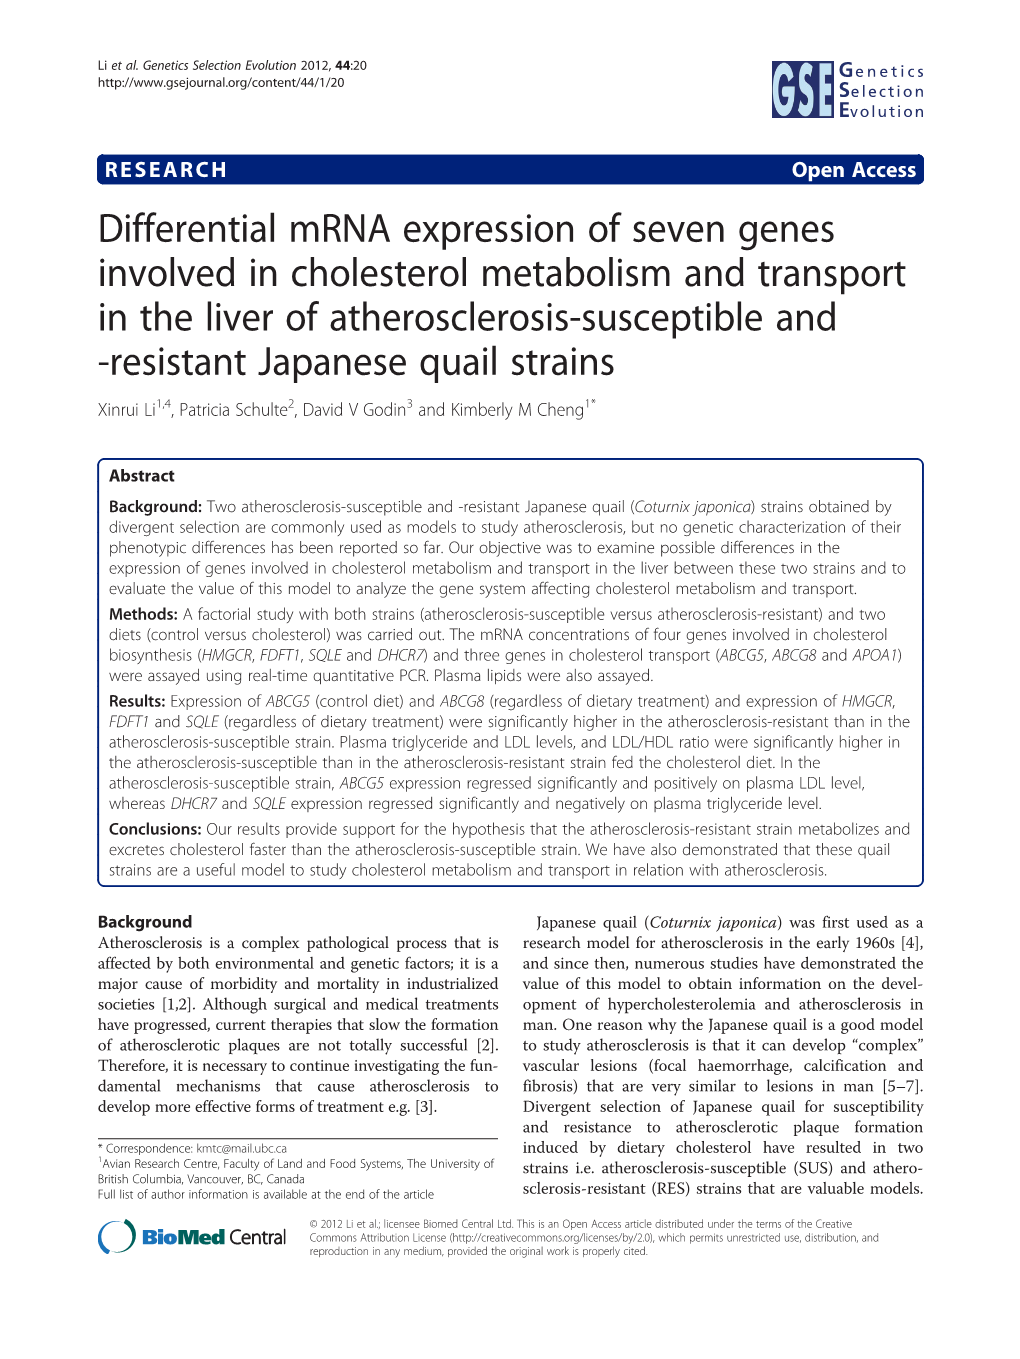 Differential Mrna Expression of Seven Genes Involved in Cholesterol Metabolism and Transport in the Liver of Atherosclerosis-Sus